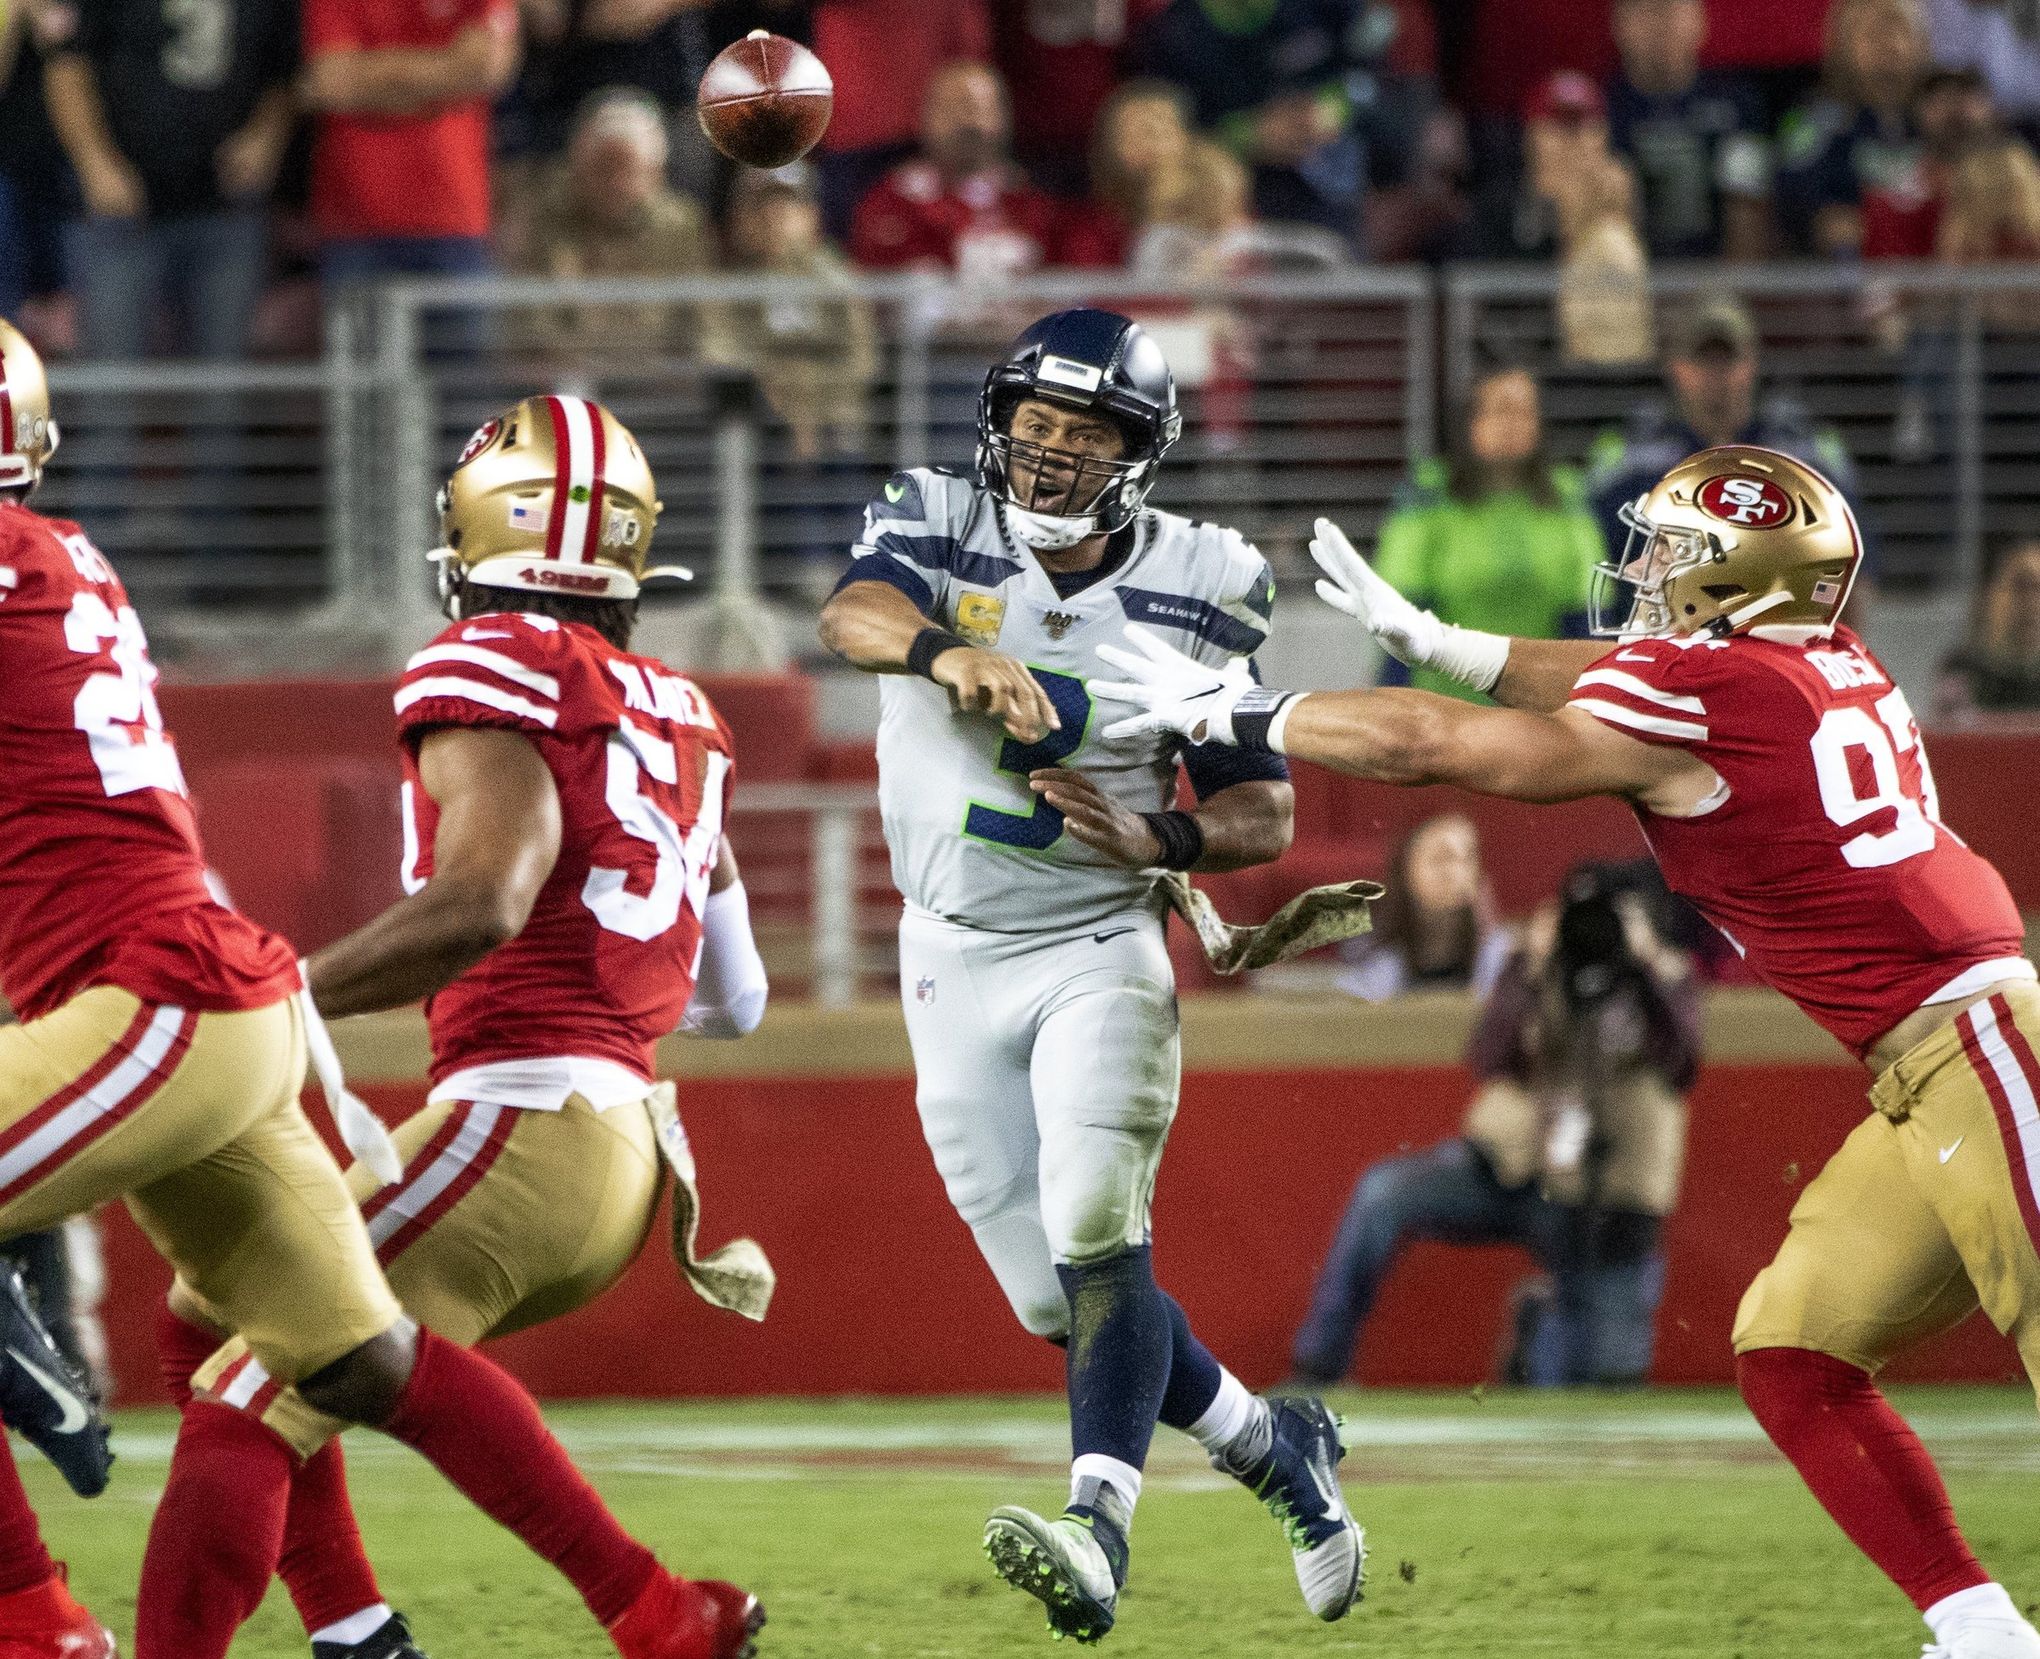 Seahawks-49ers predictions: Seattle Times writers make their picks